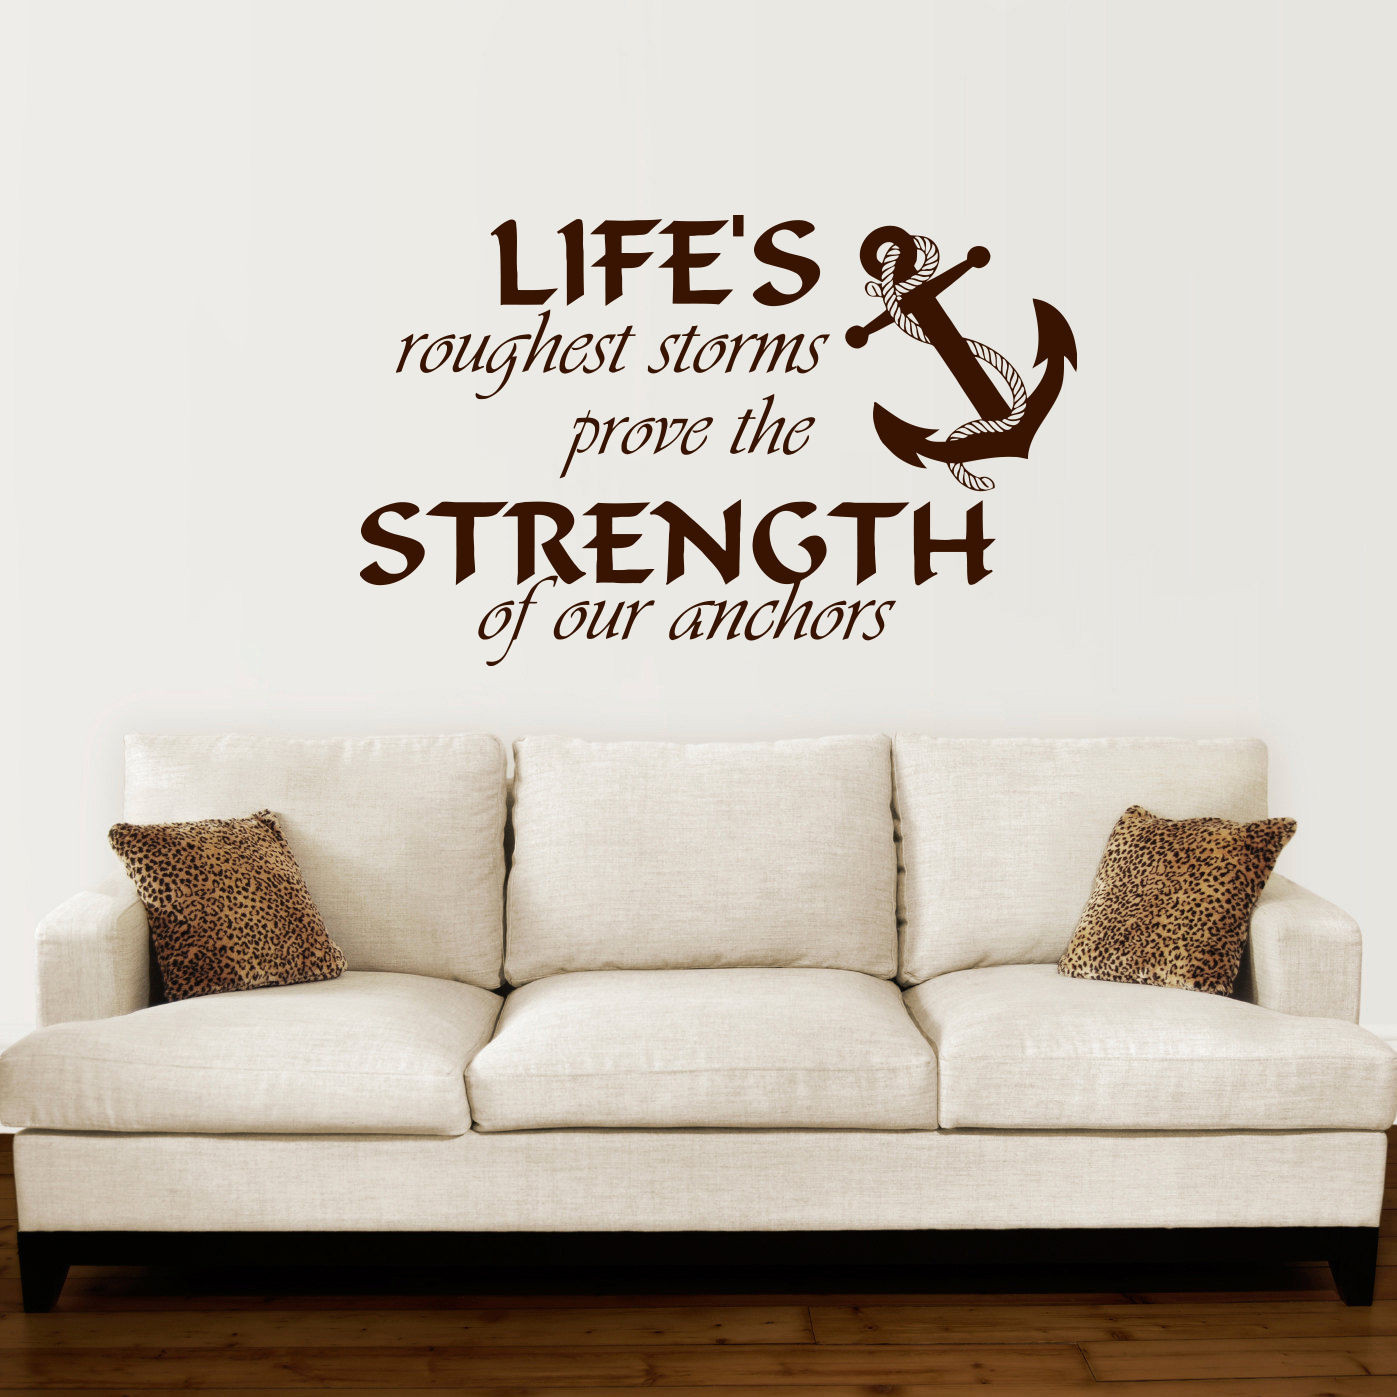 Wall Sticker Quotes For Bedroom
 Anchor Wall Decal Quotes Nautical Sayings Wall Vinyl